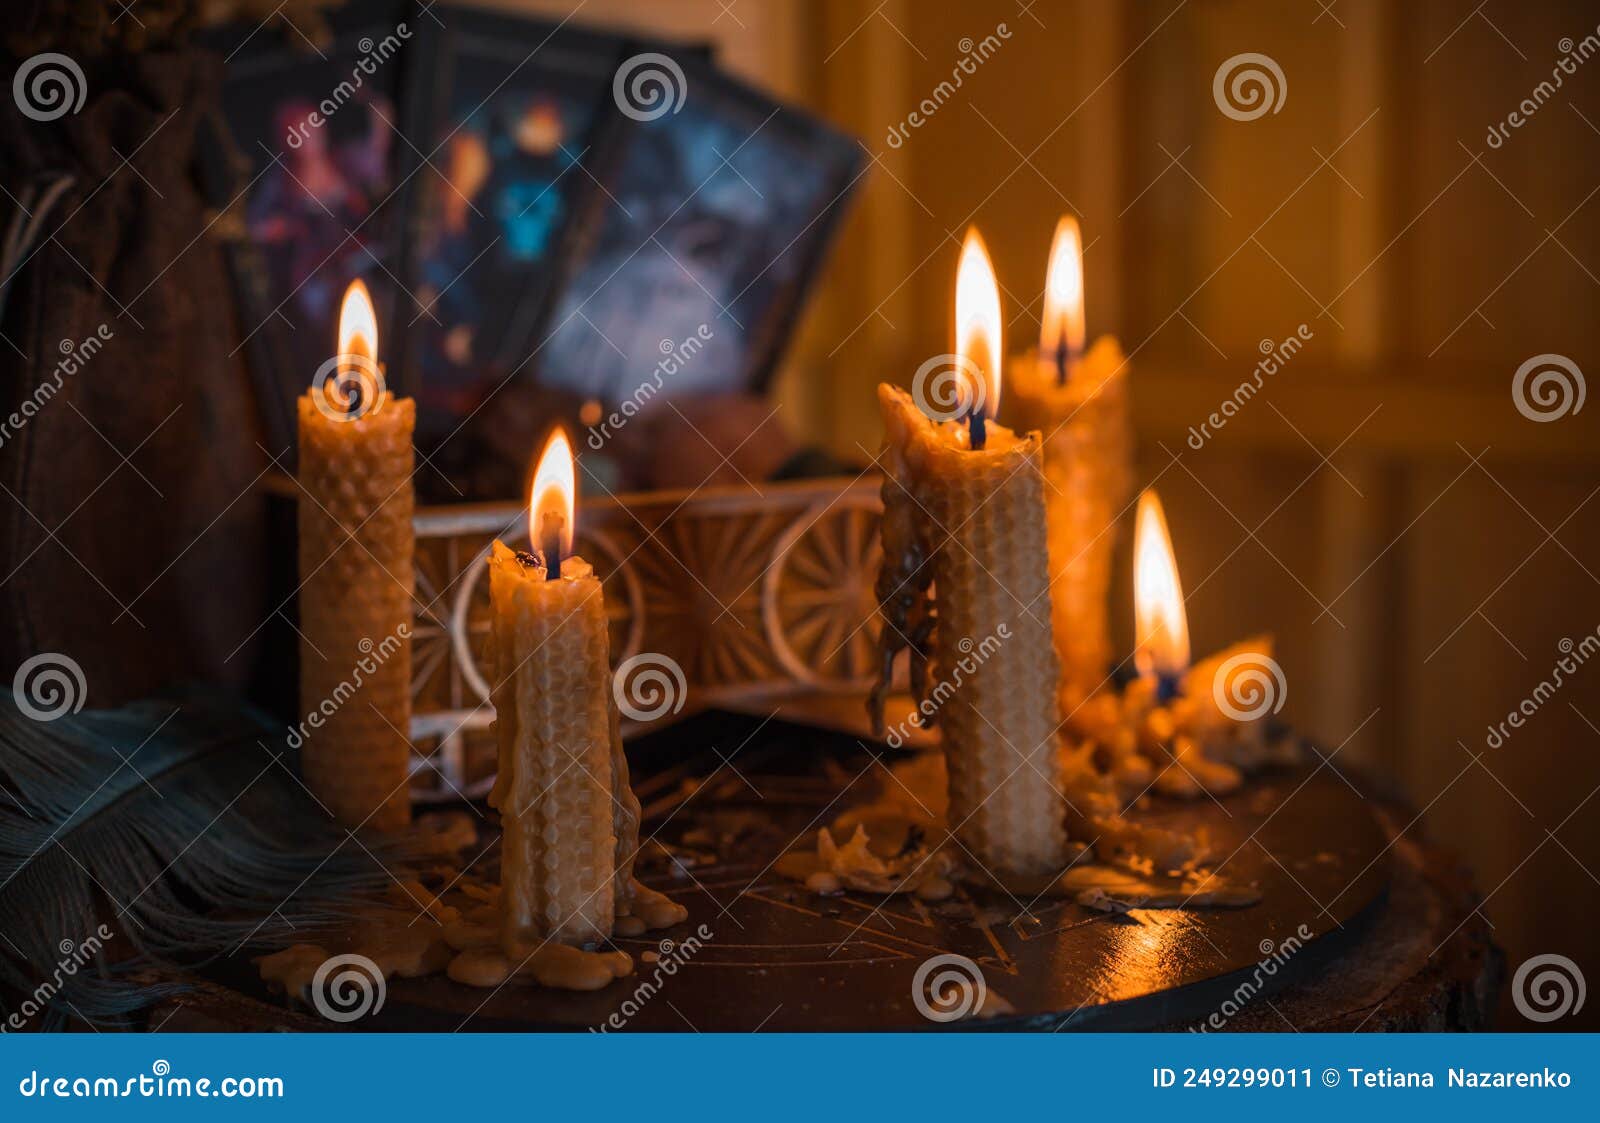 magic concept. paganism and wicca rite, altar of witch